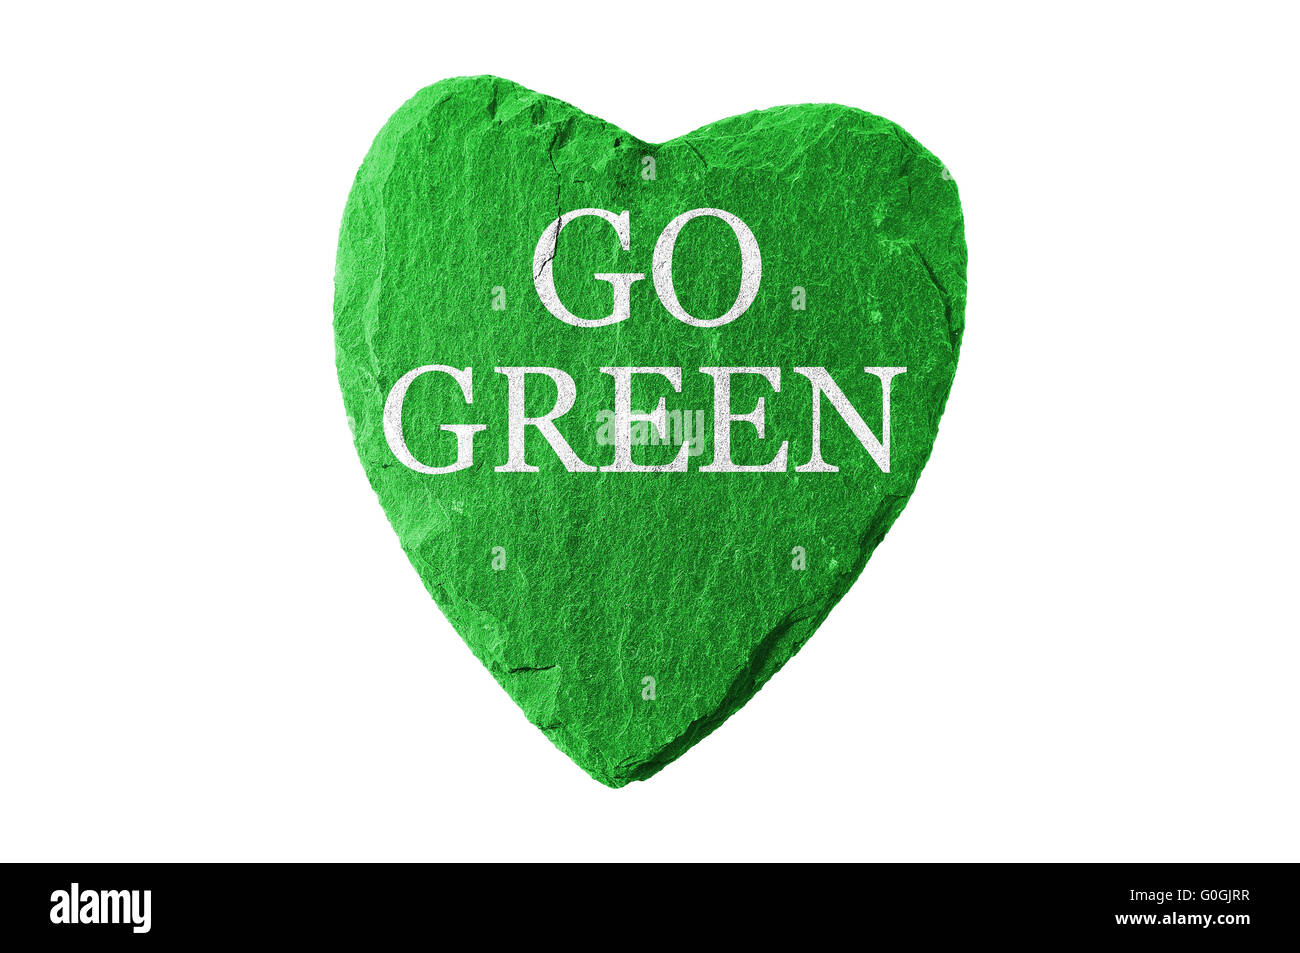 green heart wit go green writing Stock Photo